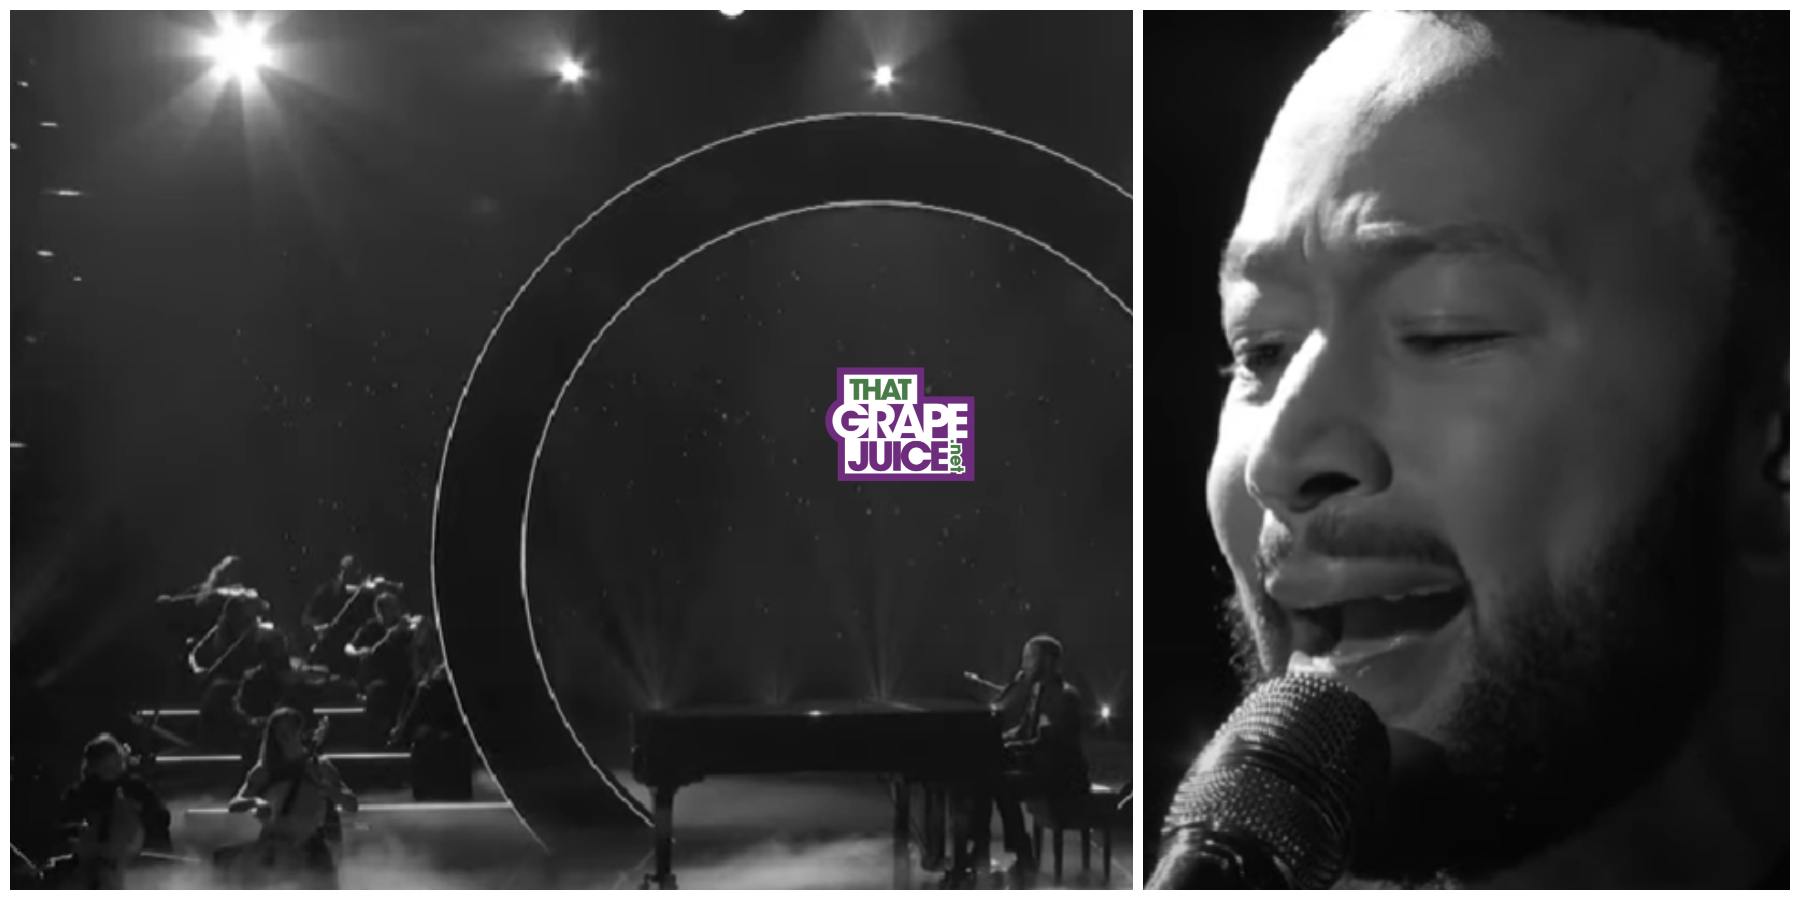 Watch: John Legend Gets Standing Ovation on ‘The Voice’ for Stunning ‘Ordinary People’ Performance As Classic Song Nears Its 20th Anniversary